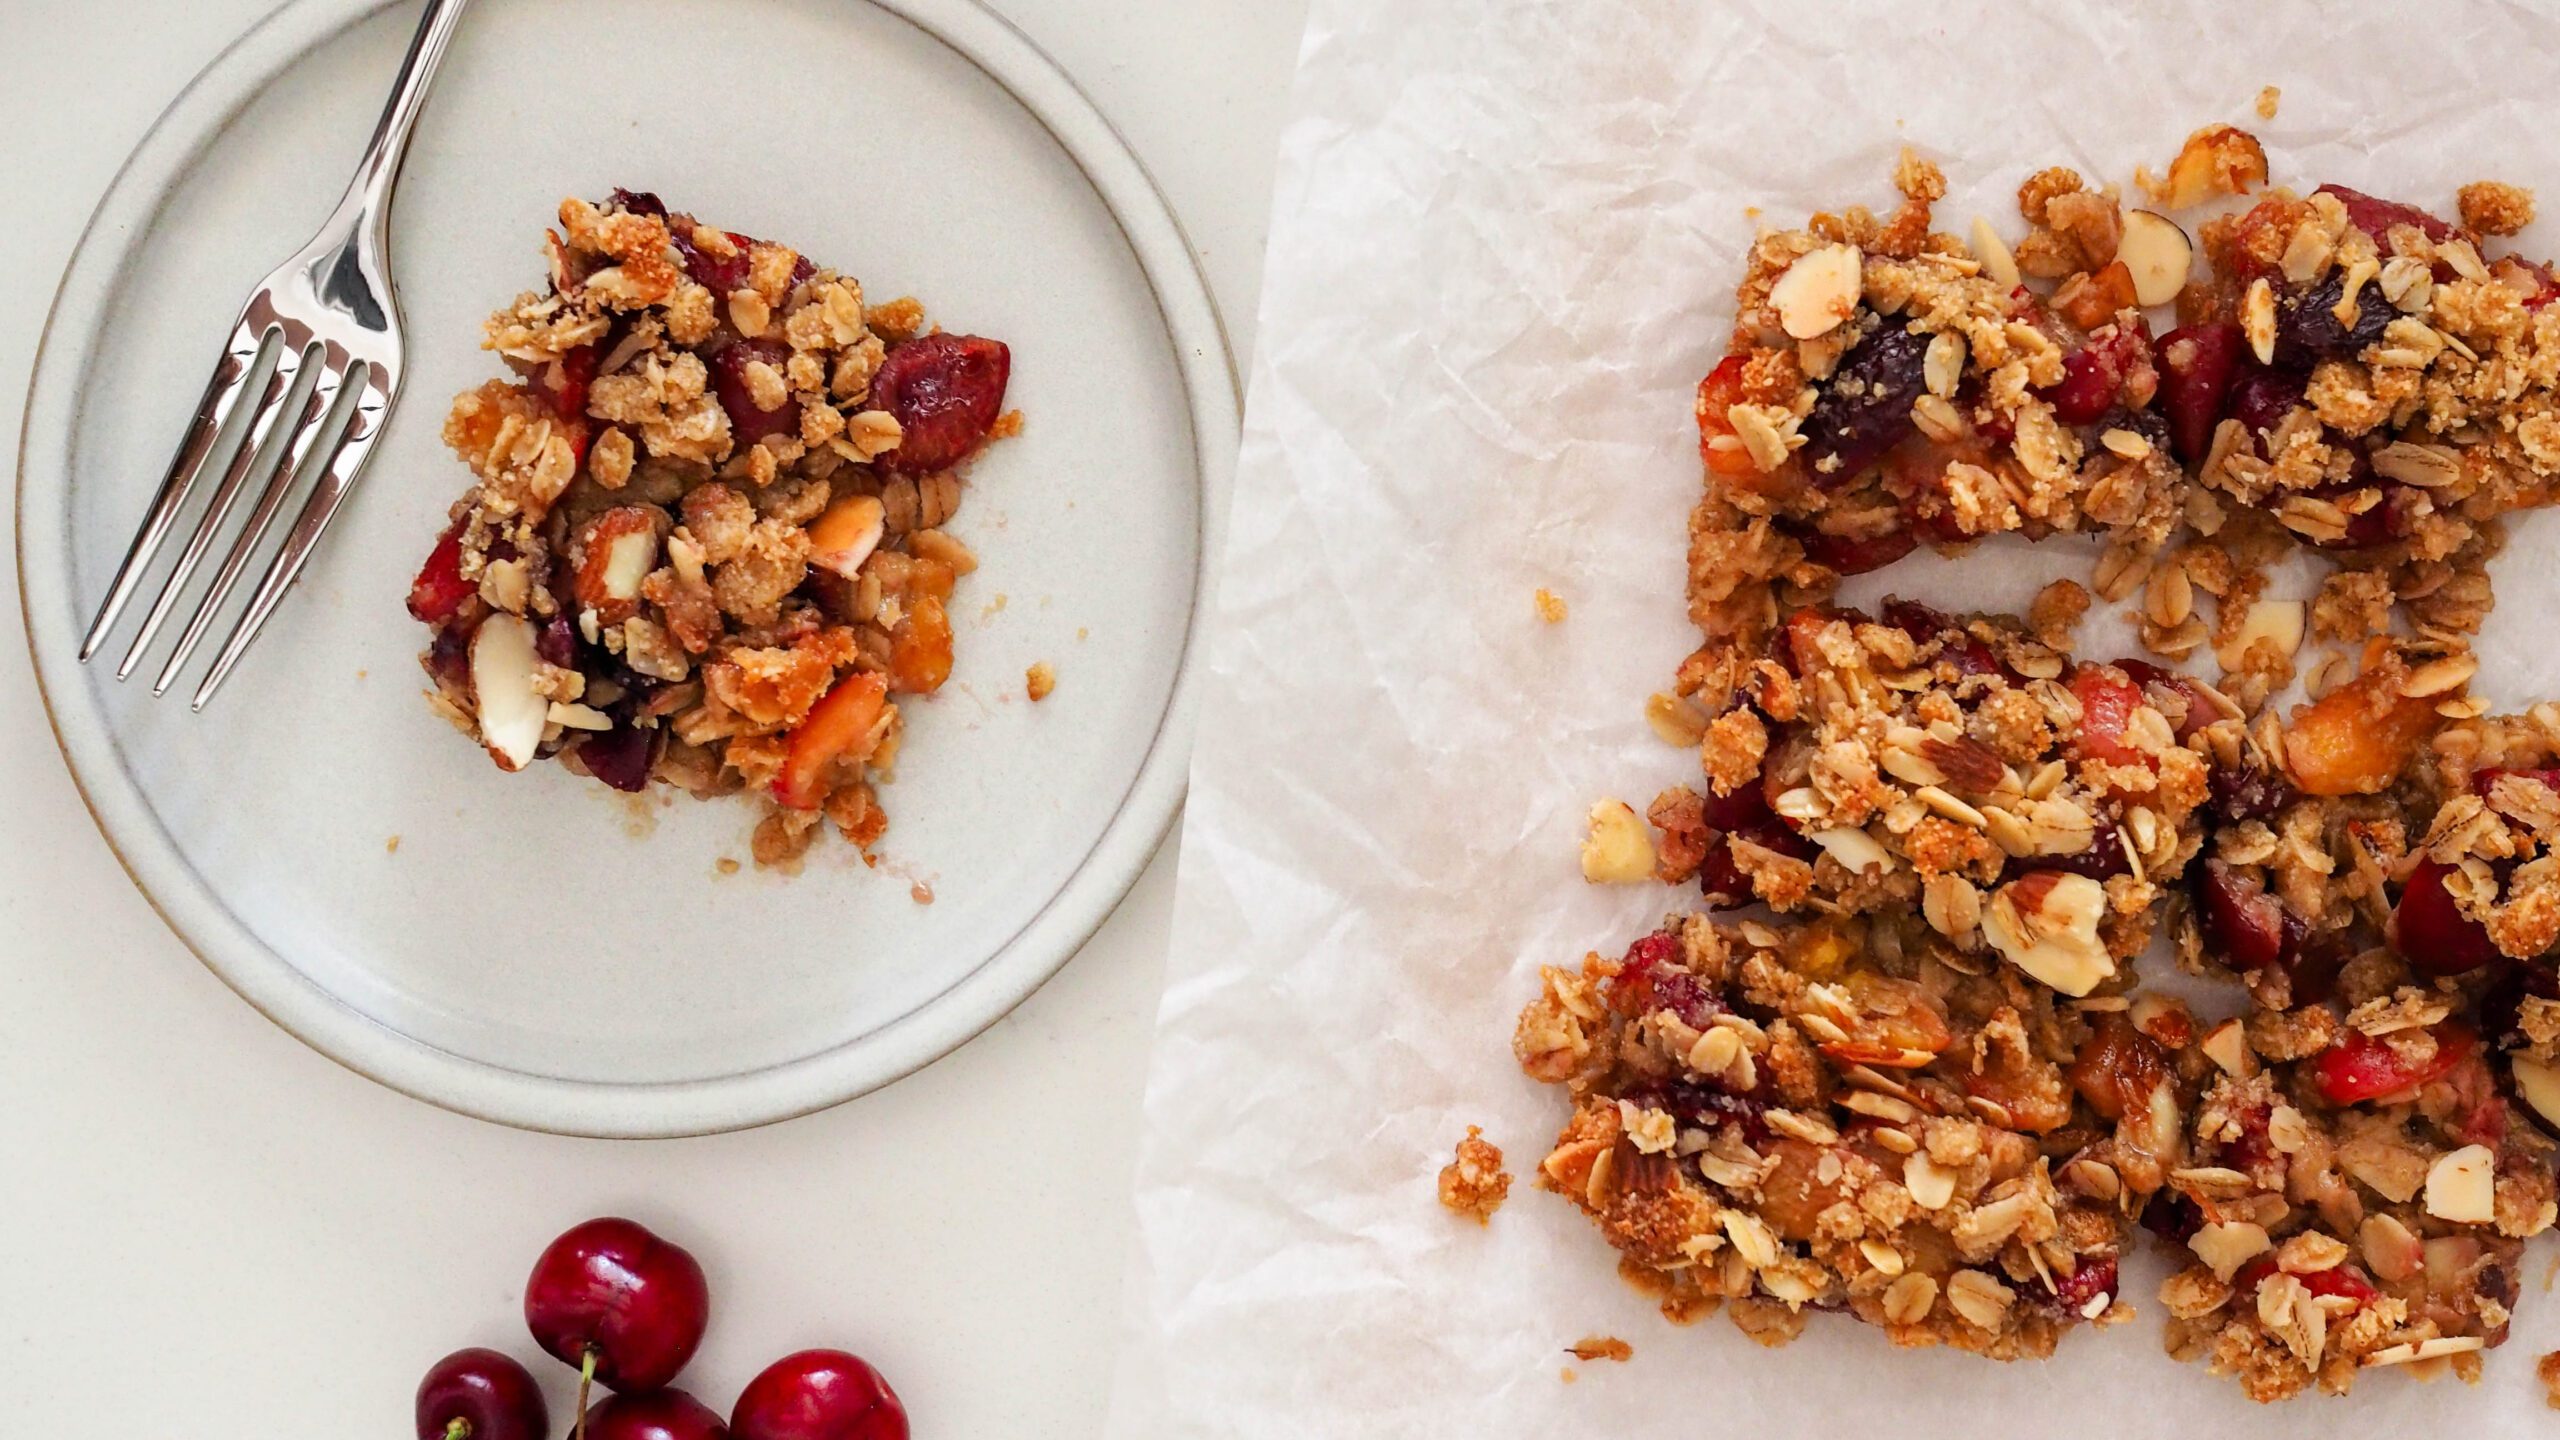 Best Cherry and Almond Crumble Recipe